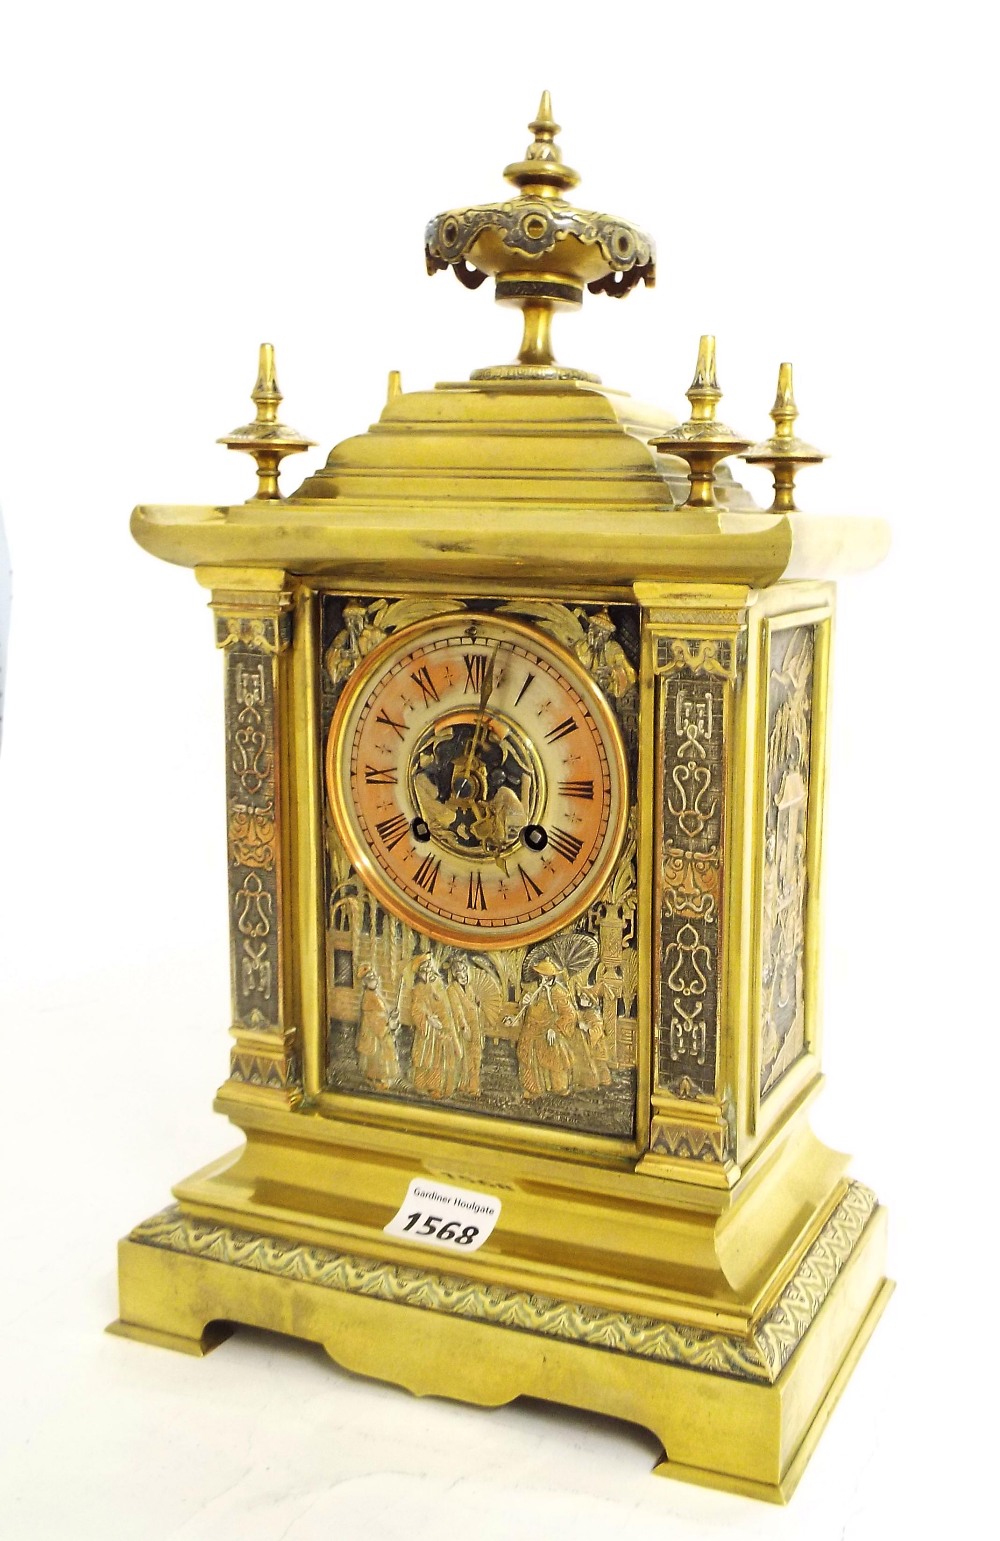 Brass chinoiserie two train mantel clock striking on a gong, the 3.5" dial within a stepped temple